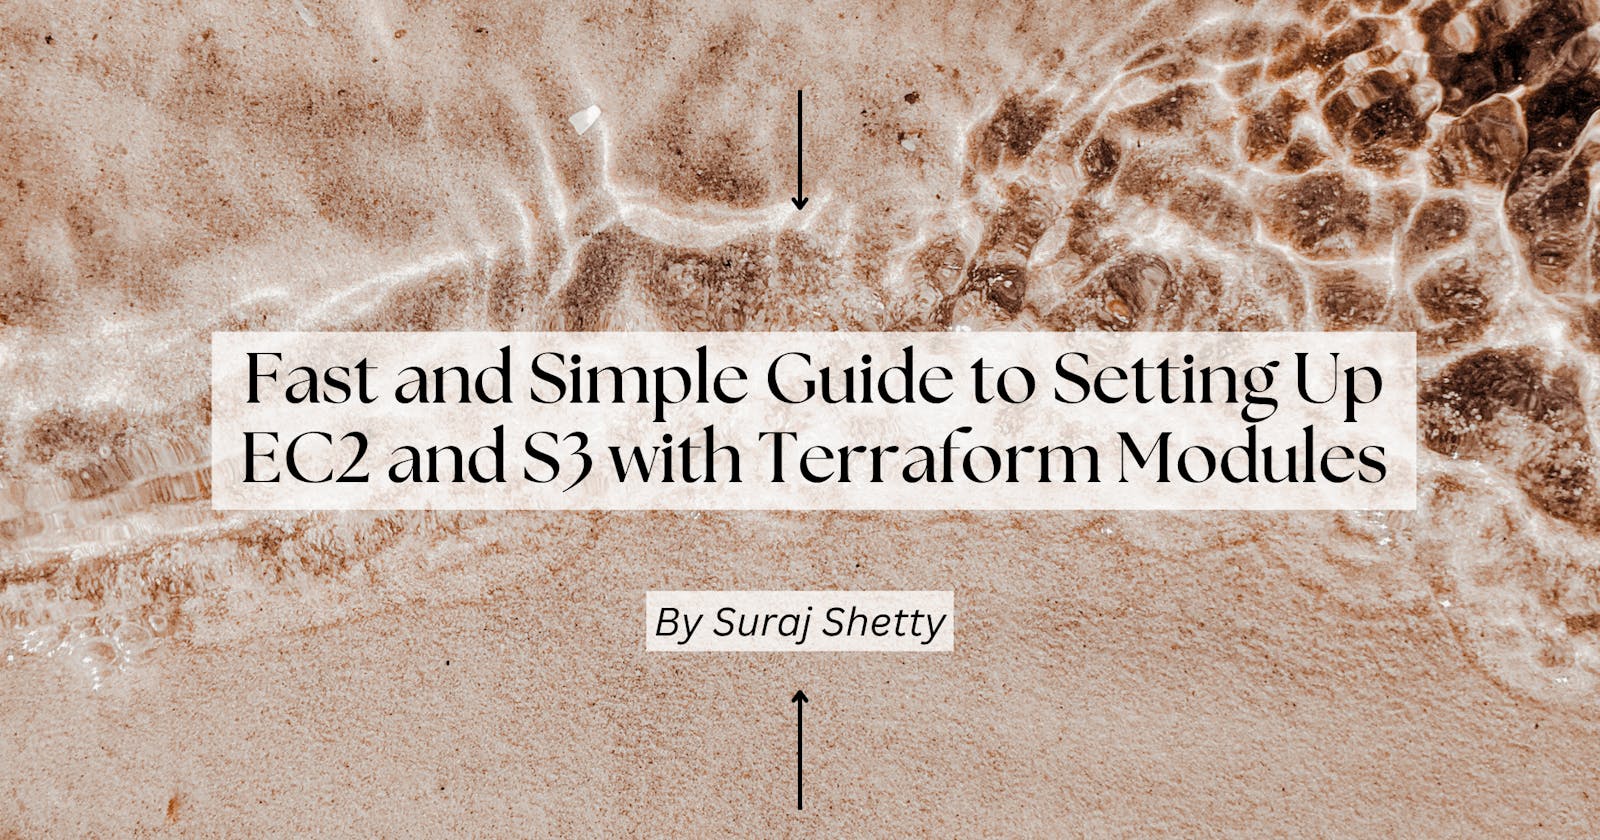 Fast and Simple Guide to Setting Up EC2 and S3 with Terraform Modules